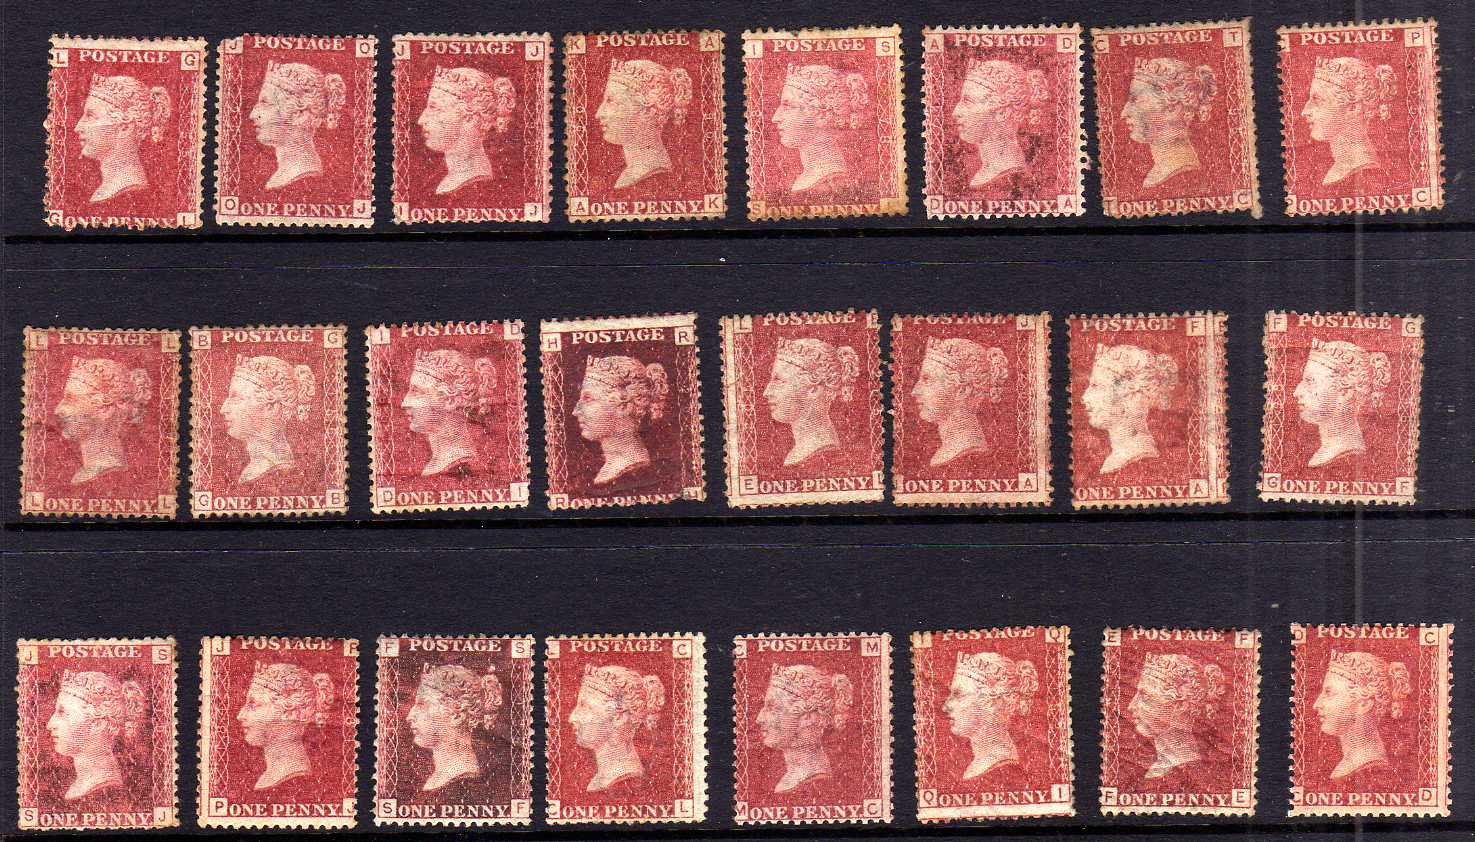 GB: 1841-79 LINE ENGRAVED UNUSED OR OG SELECTION FROM 1841 2d (DEFECTIVE), 1d PLATES (29), - Image 3 of 3